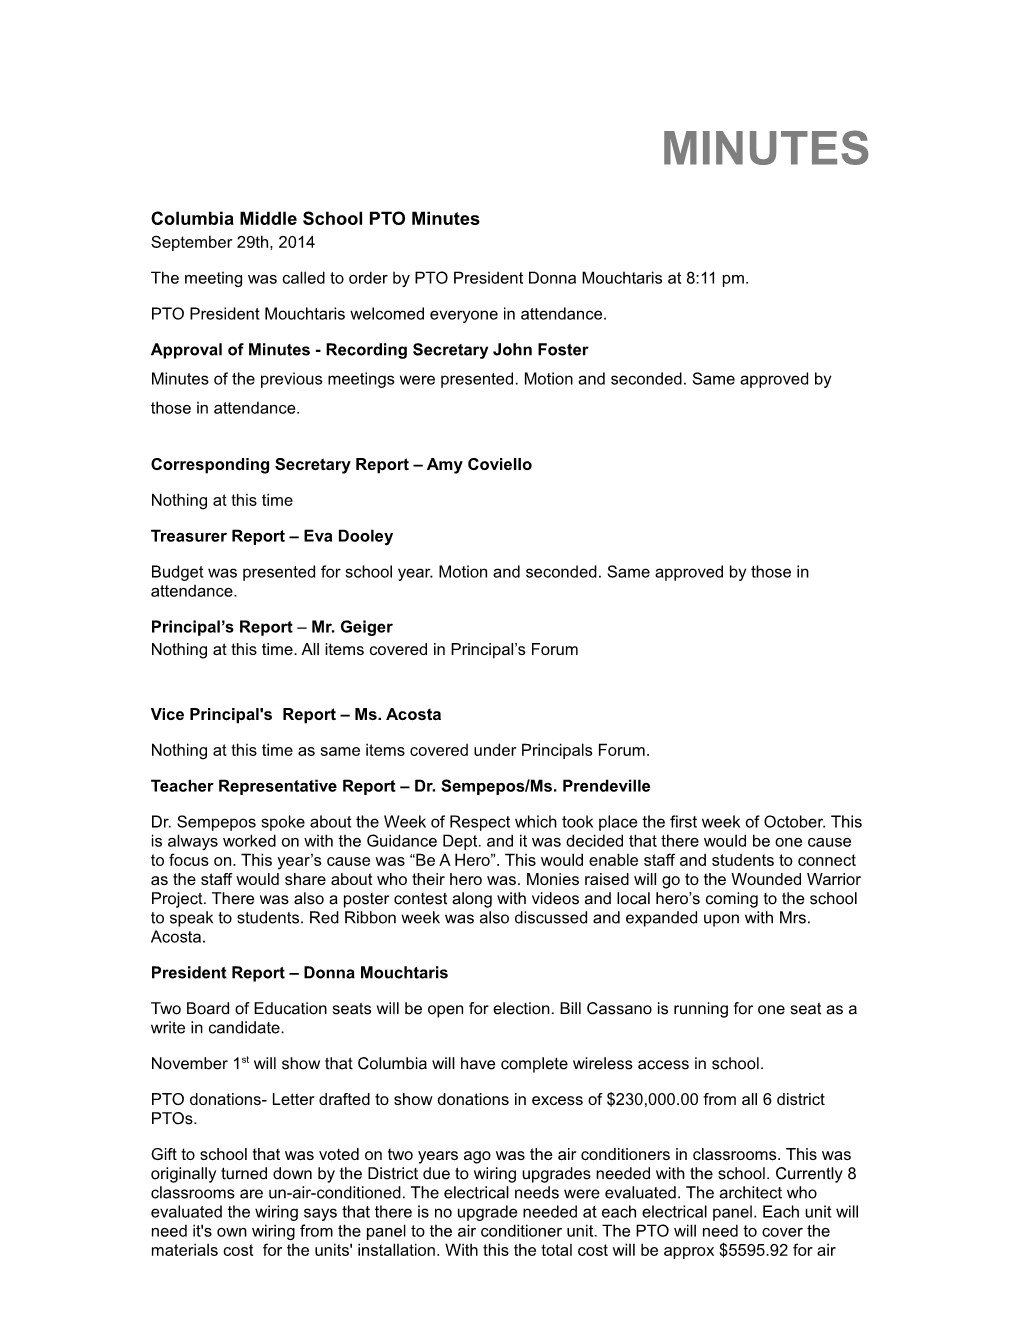 Columbia Middle School PTO Minutes